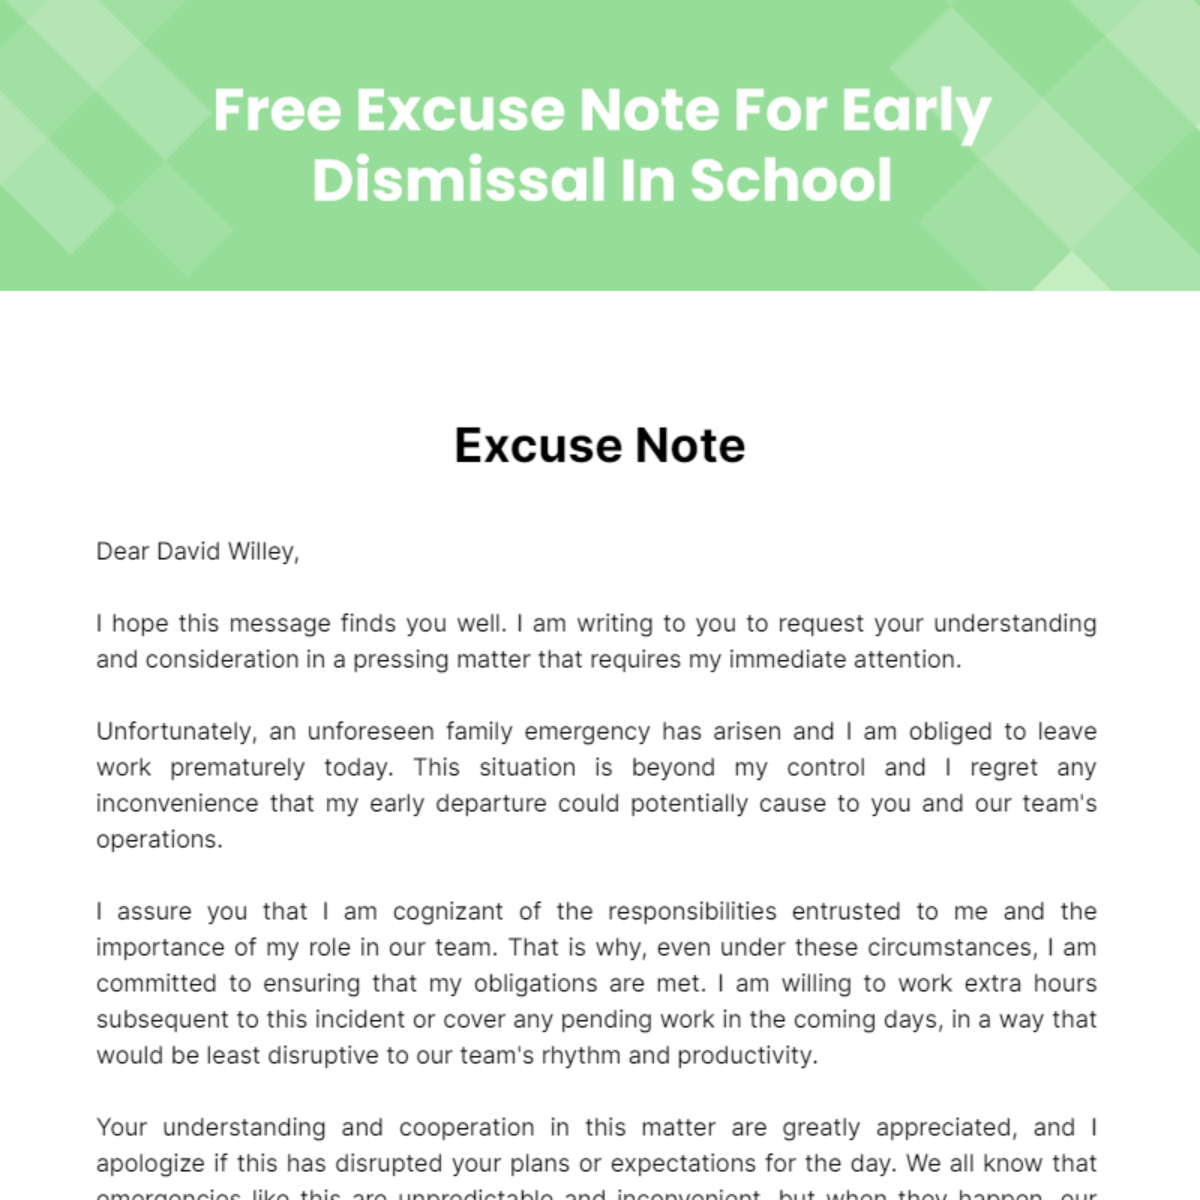 Free Excuse Note For Early Dismissal In School Template